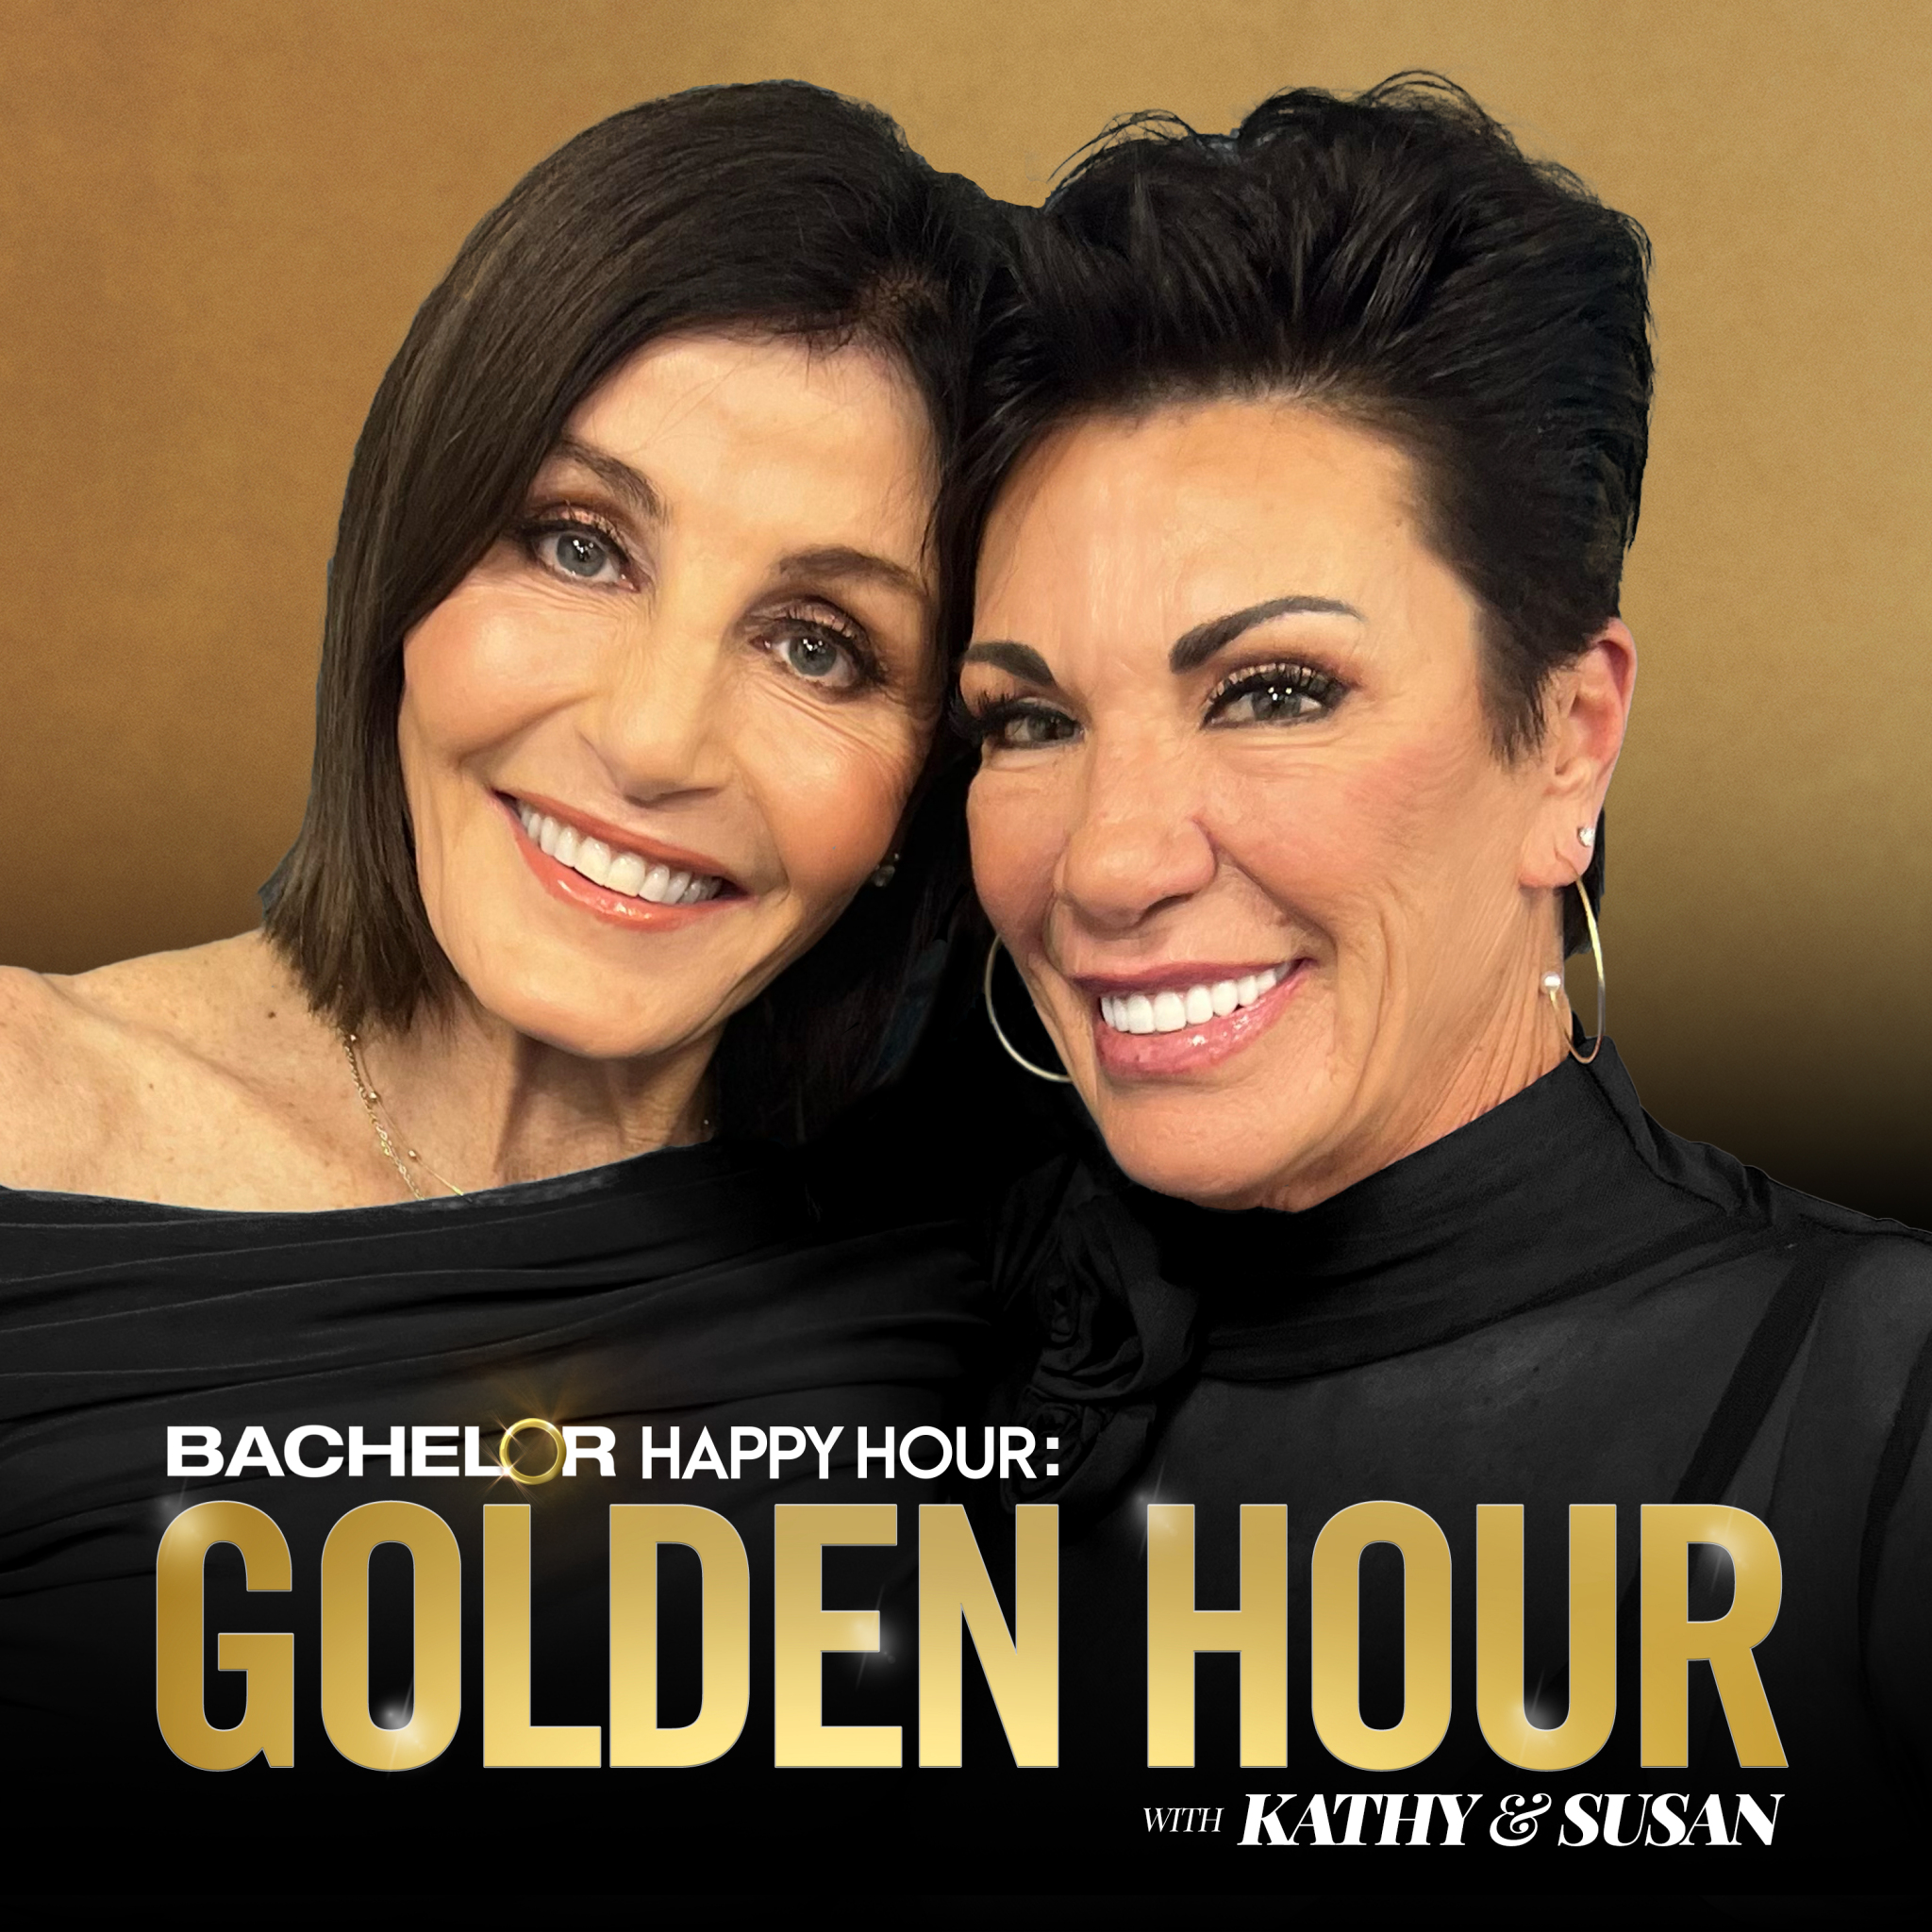 Cheating, Dating Age Gaps, and Mothers’ Intuition — Susan & Kathy Get into It All  | Golden Hour